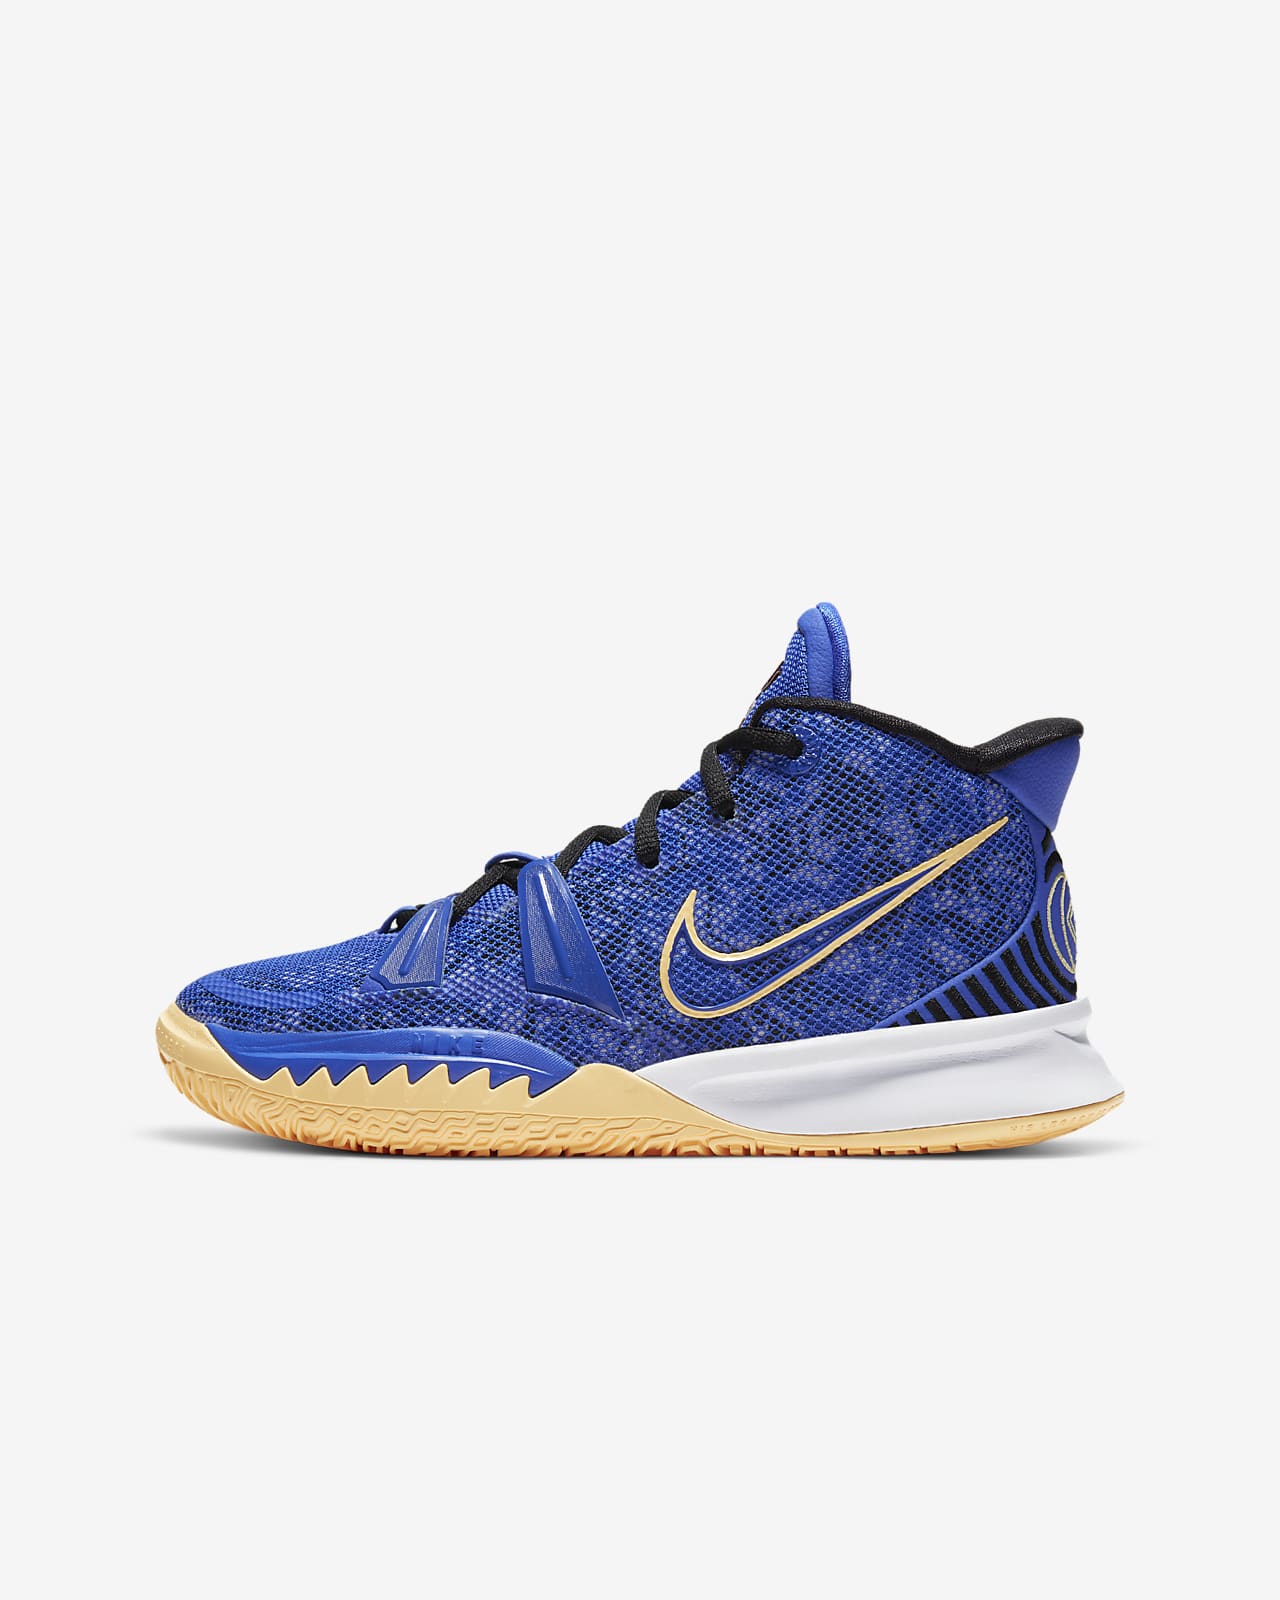 kyrie 5 youth size 7